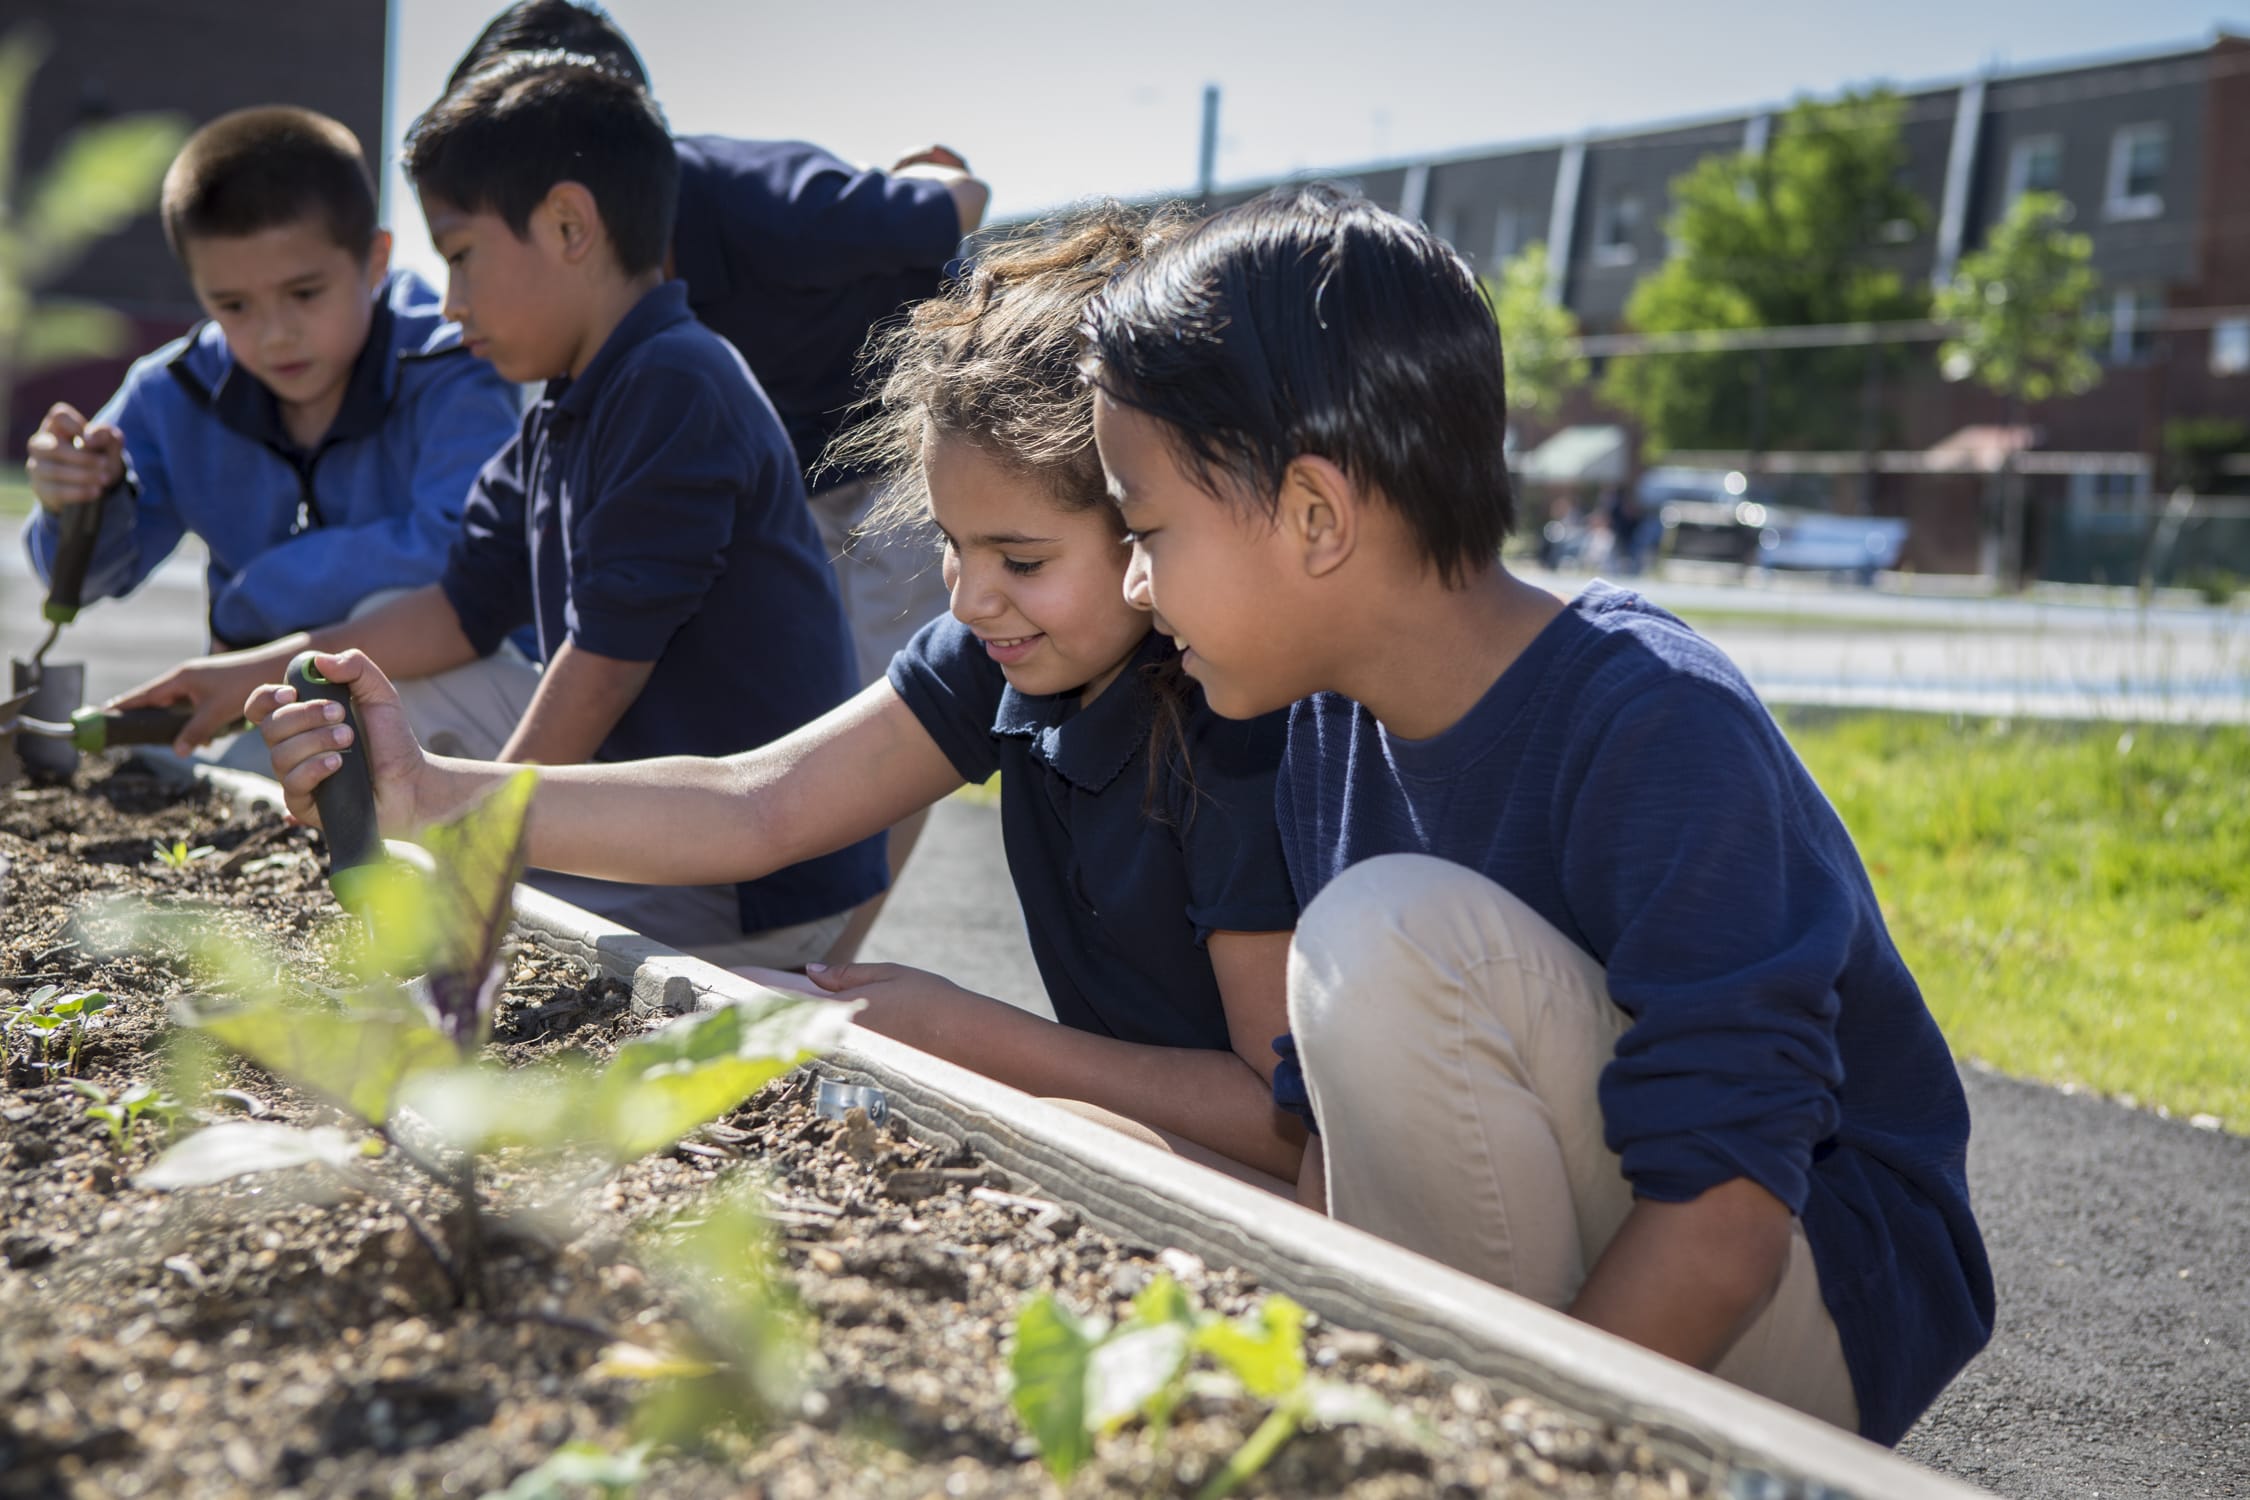 A group of children are planting vegetables in a garden.